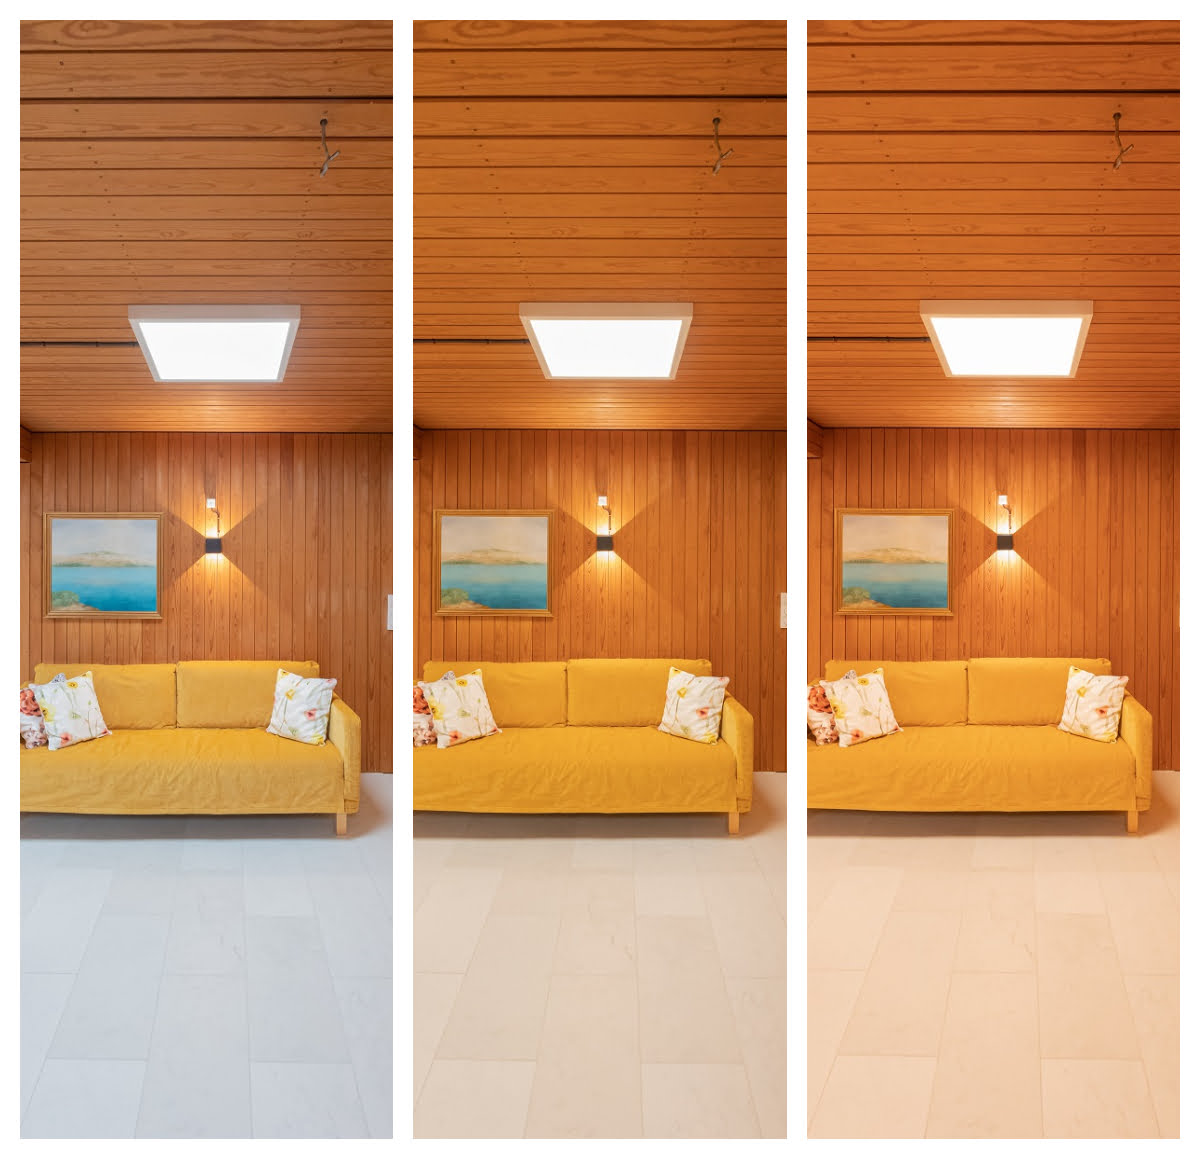 In a wood panelled room, the shades of the wood, as well as the shade of the renovated floor, will change dramatically depending on which shade of white light you adjust from the panels. LedStore.fi